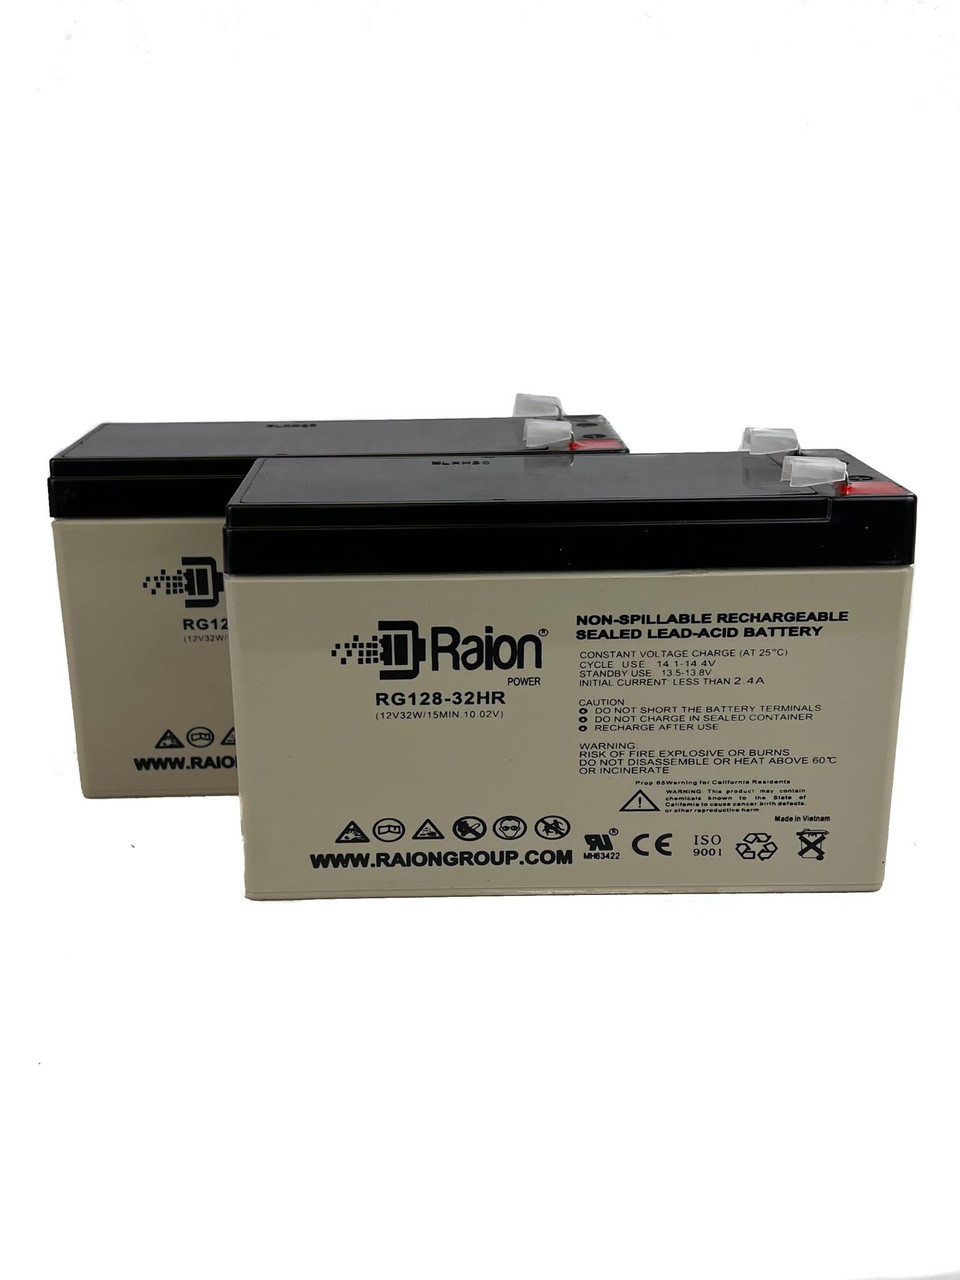 Raion Power 12V 7.5Ah High Rate Discharge UPS Batteries for Powerware PW5105-1000i - 2 Pack